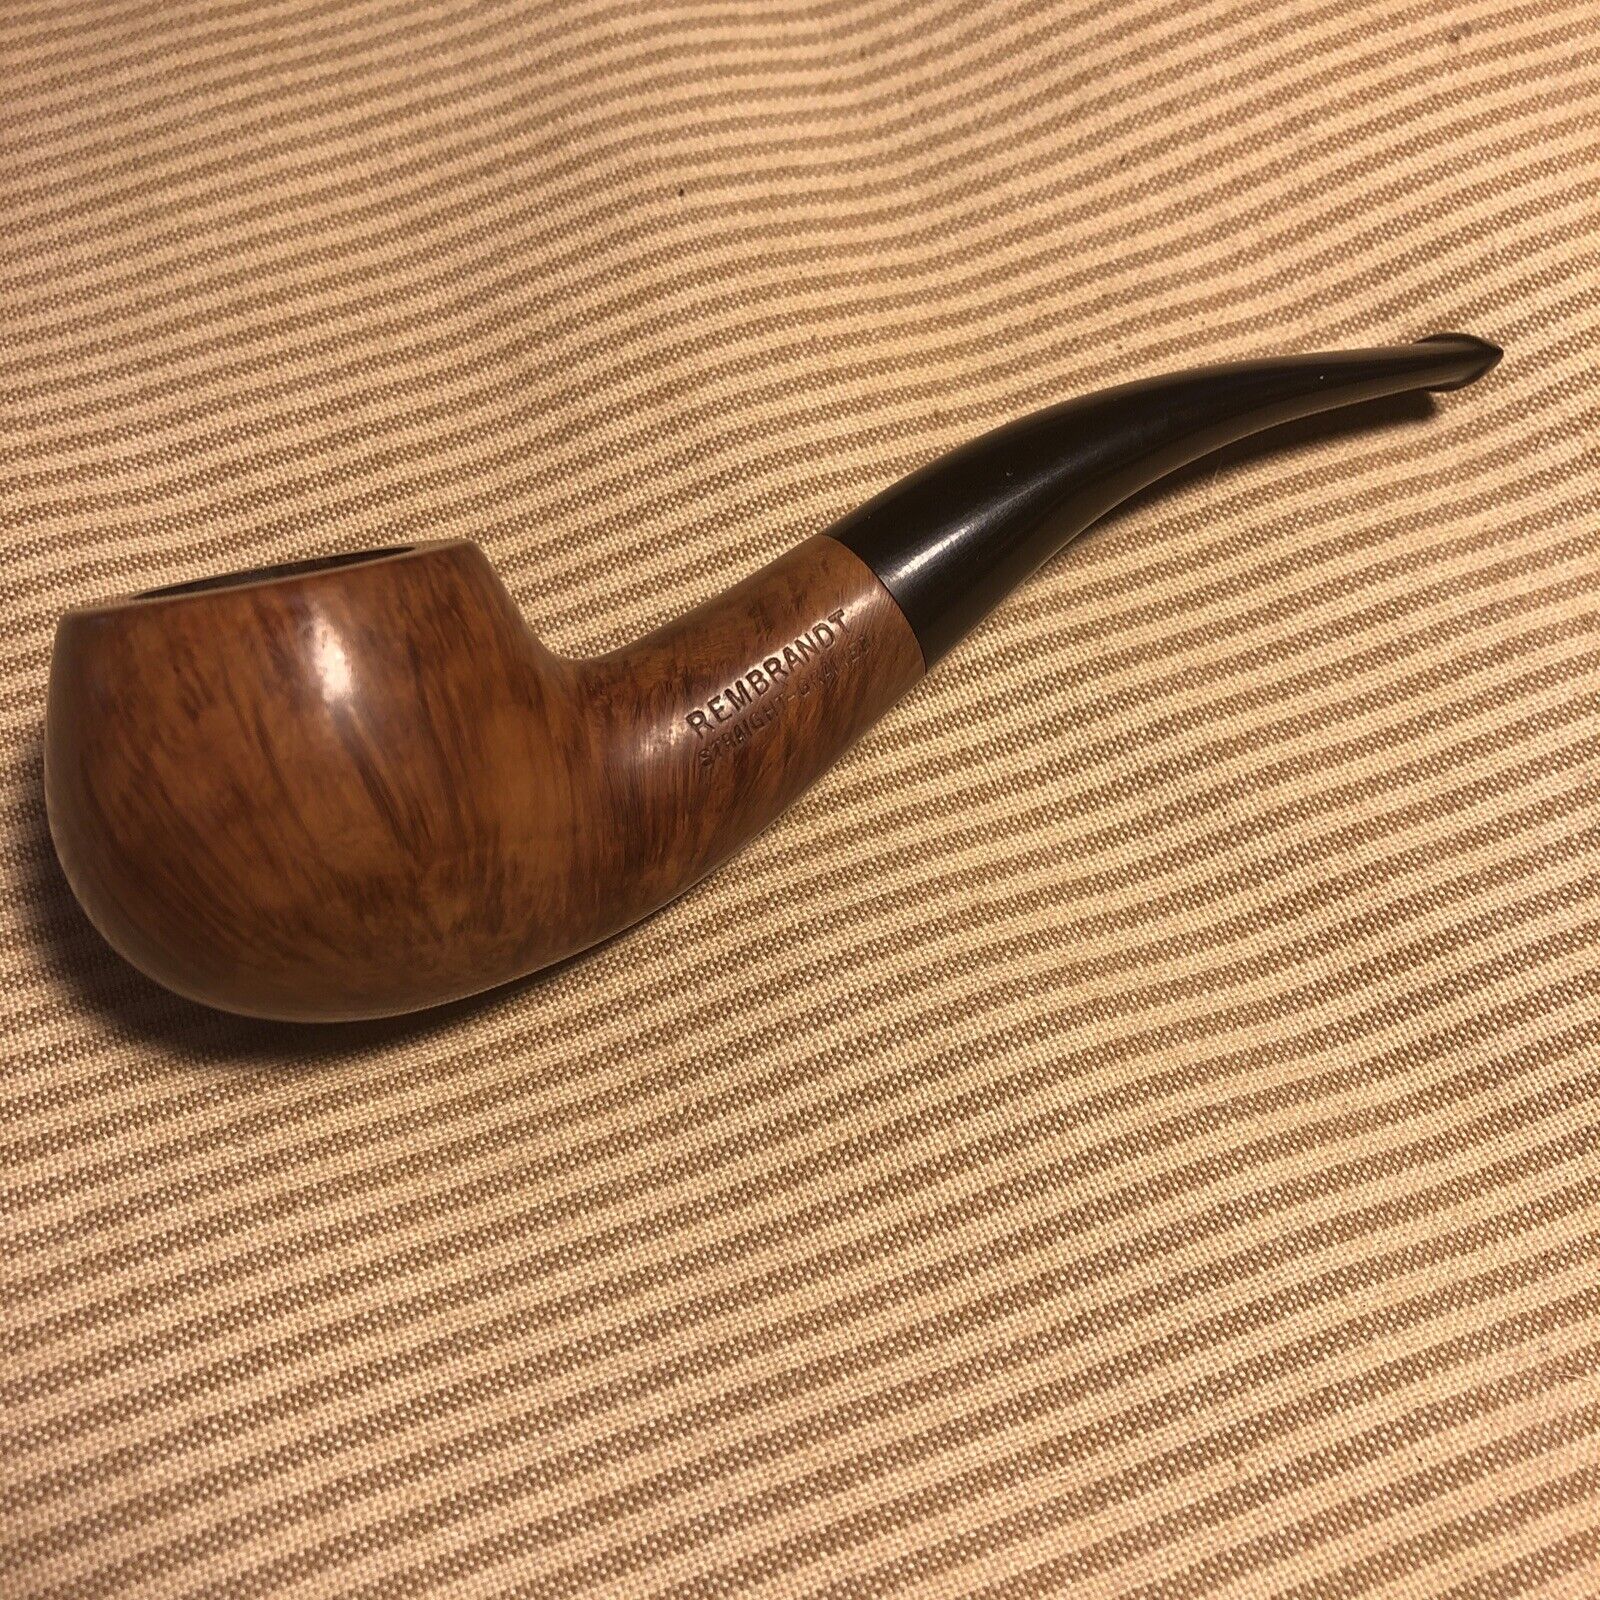 Vintage Wally Frank Rembrandt 40 Imported Briar Straight Grained